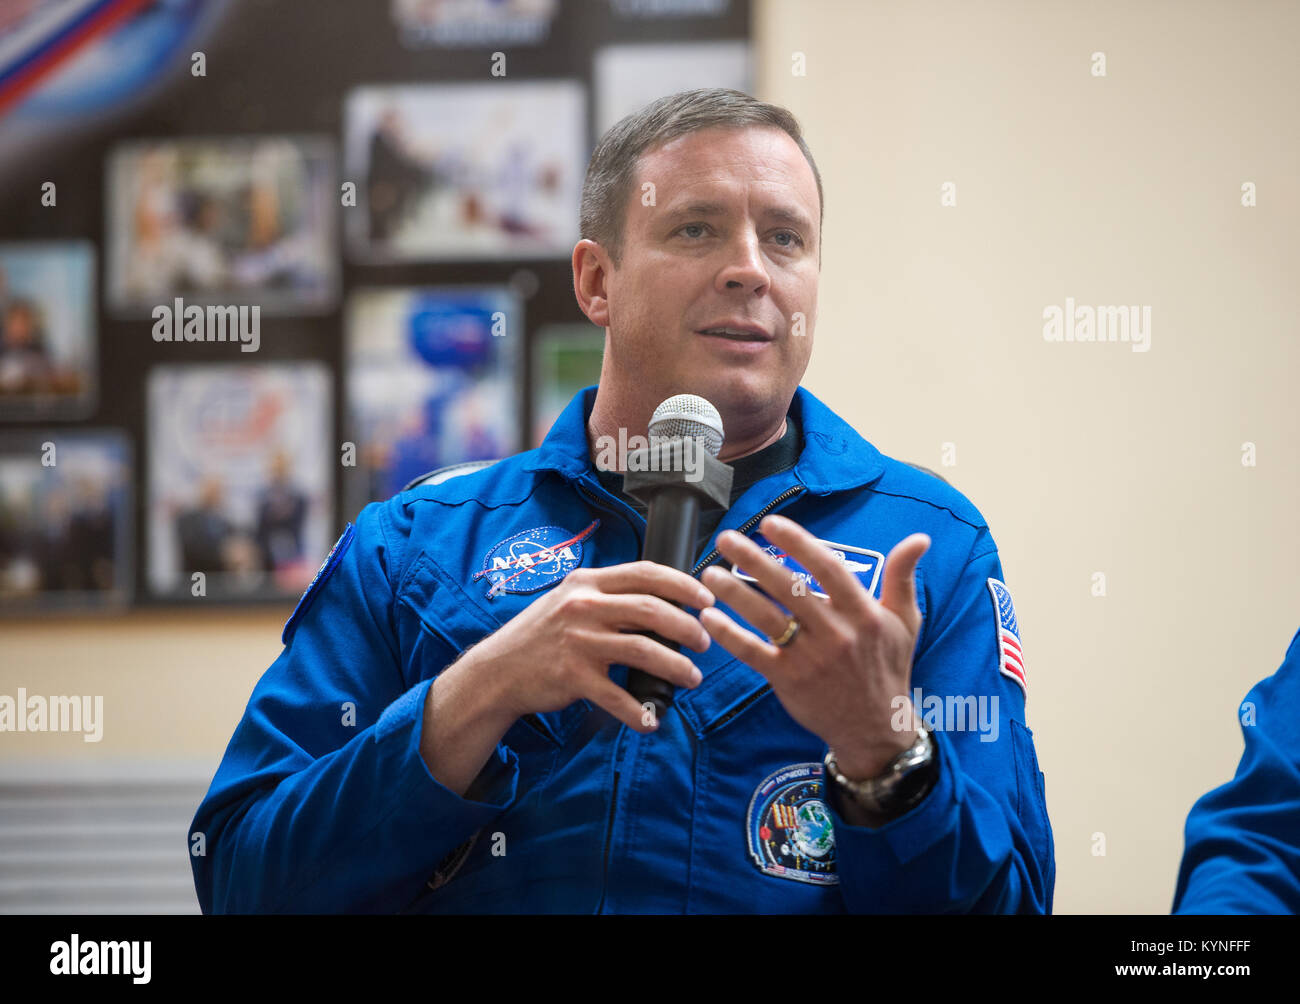 Expedition 51 Flight Engineer Jack Fischer of NASA, answers a question during a press conference on Wednesday, April 19, 2017, at the Cosmonaut Hotel in Baikonur, Kazakhstan. Launch of the Soyuz rocket is scheduled for April 20 and will carry Fischer and Soyuz Commander Fyodor Yurchikhin of Roscosmos into orbit to begin their four and a half month mission on the International Space Station. Photo Credit: (NASA/Aubrey Gemignani) Stock Photo